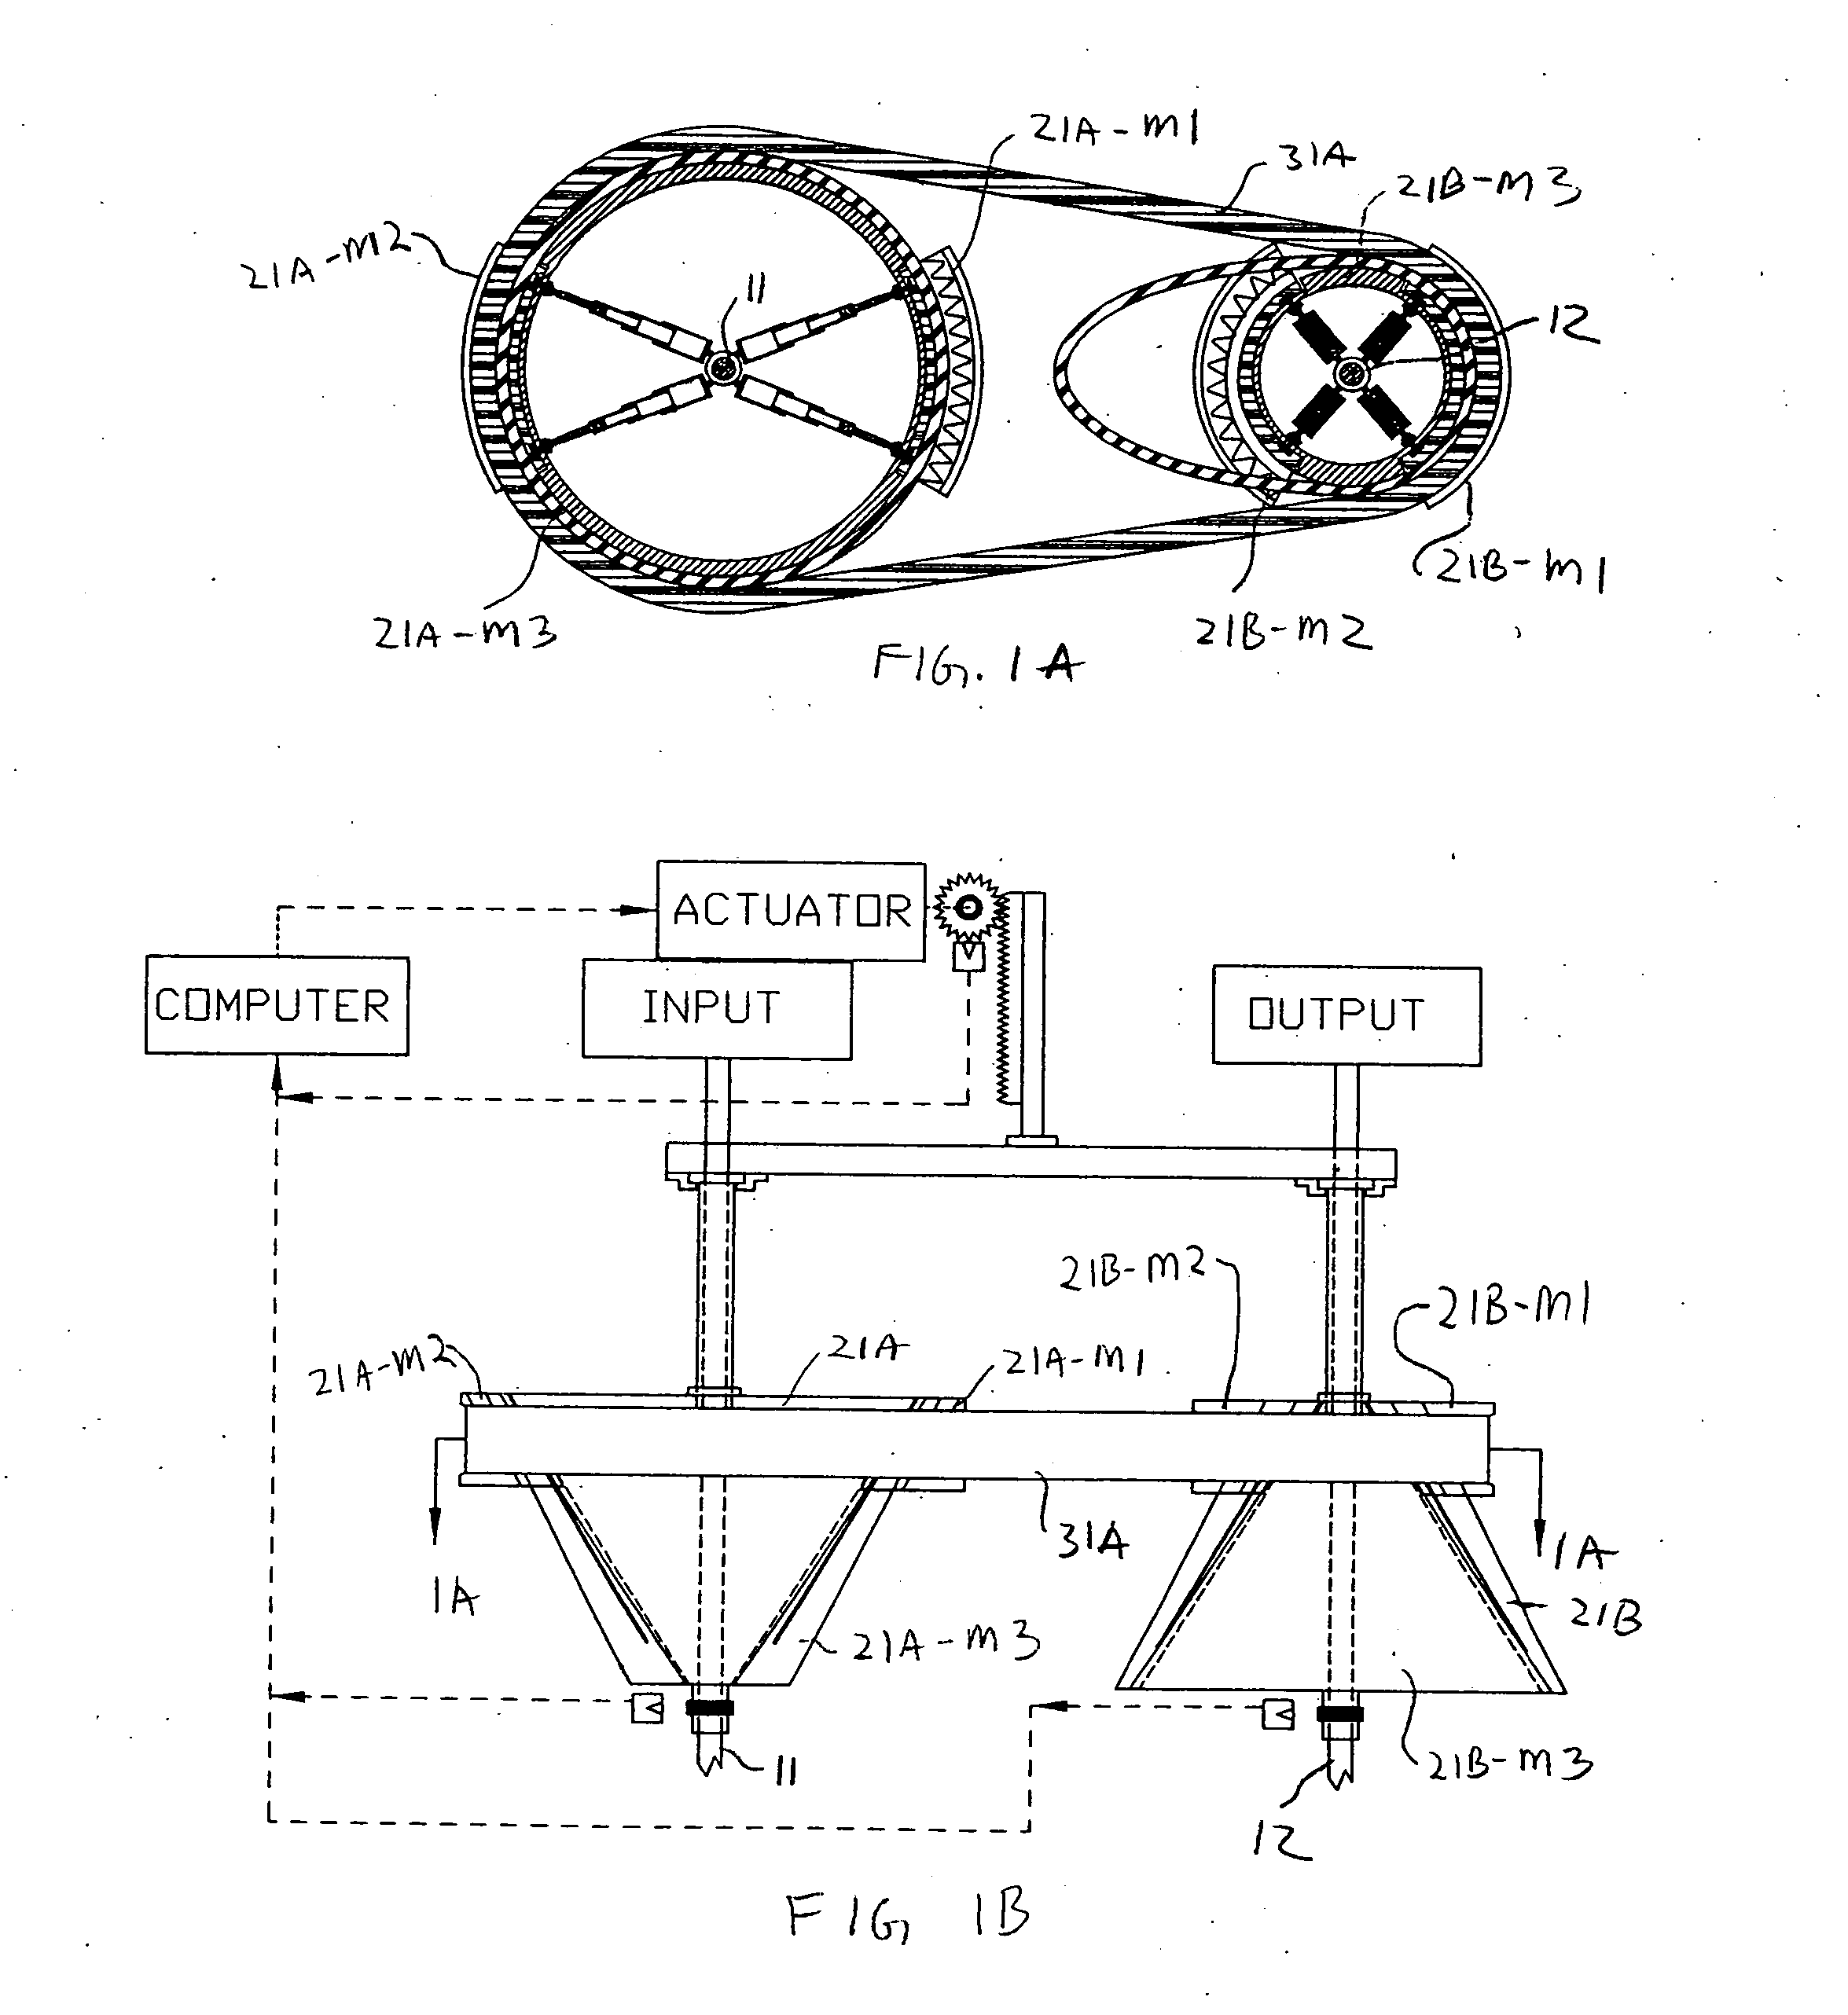 Adjuster systems for continuous variable transmissions